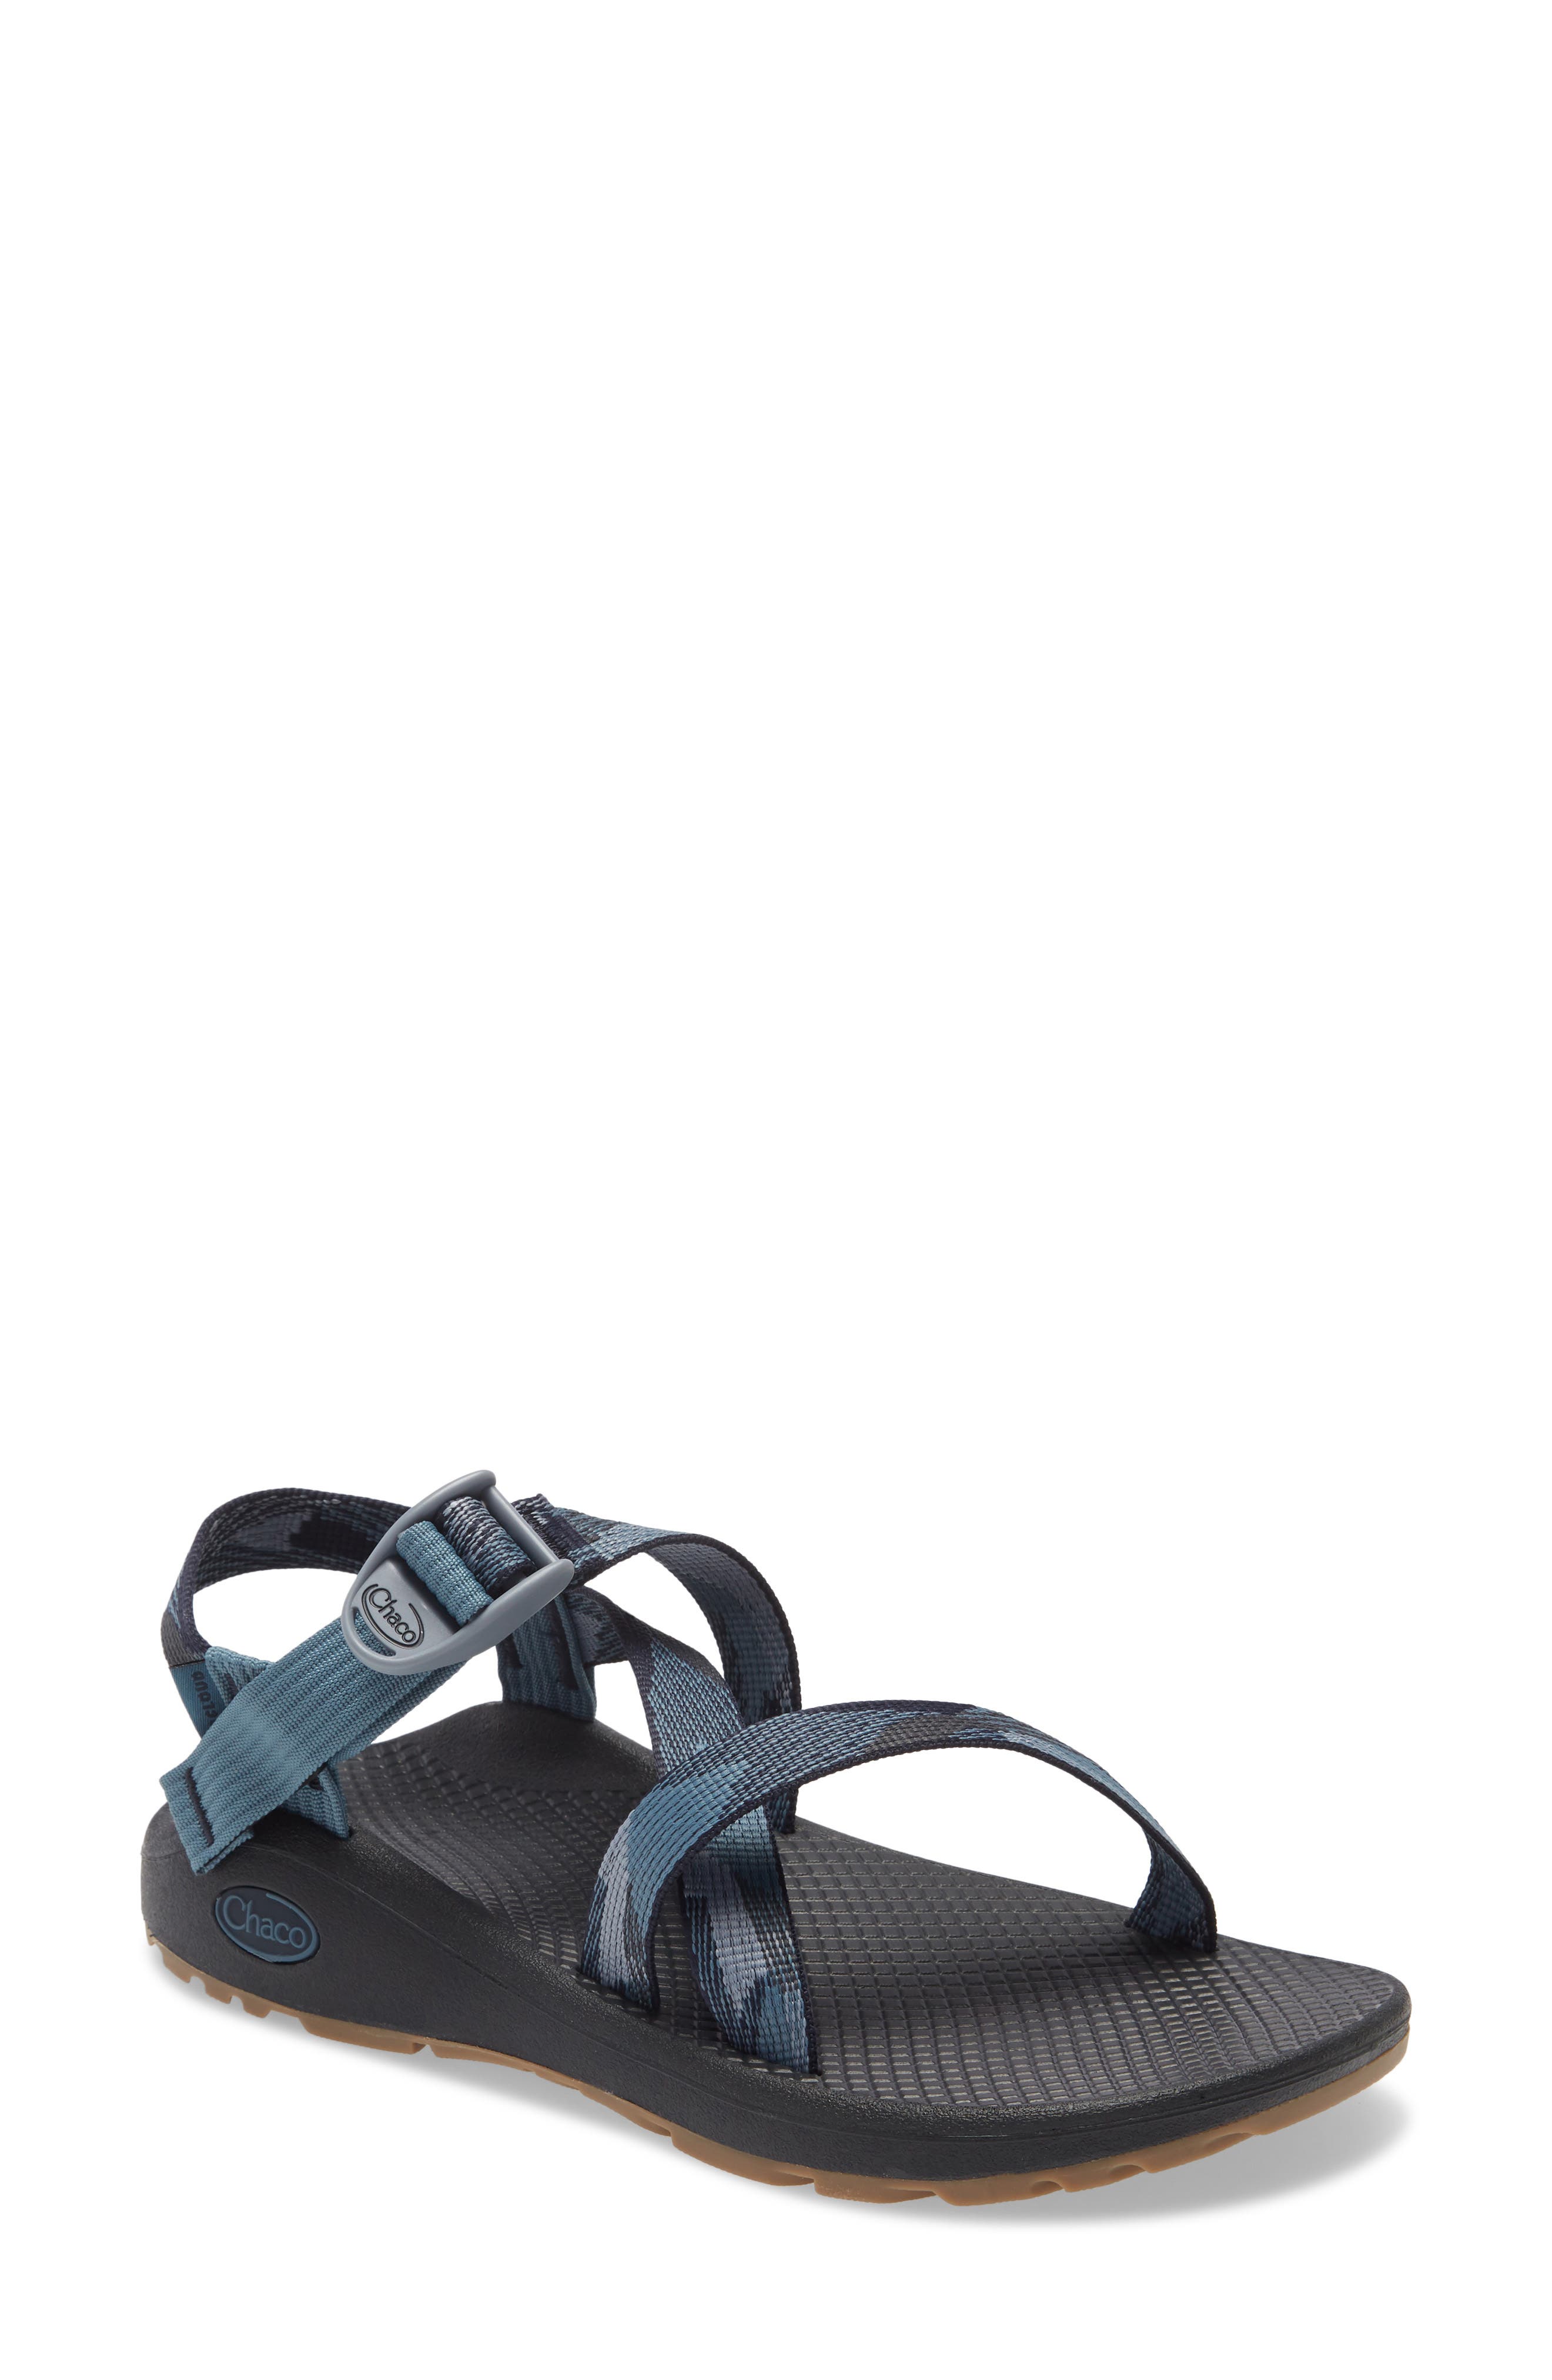 nordstrom chacos